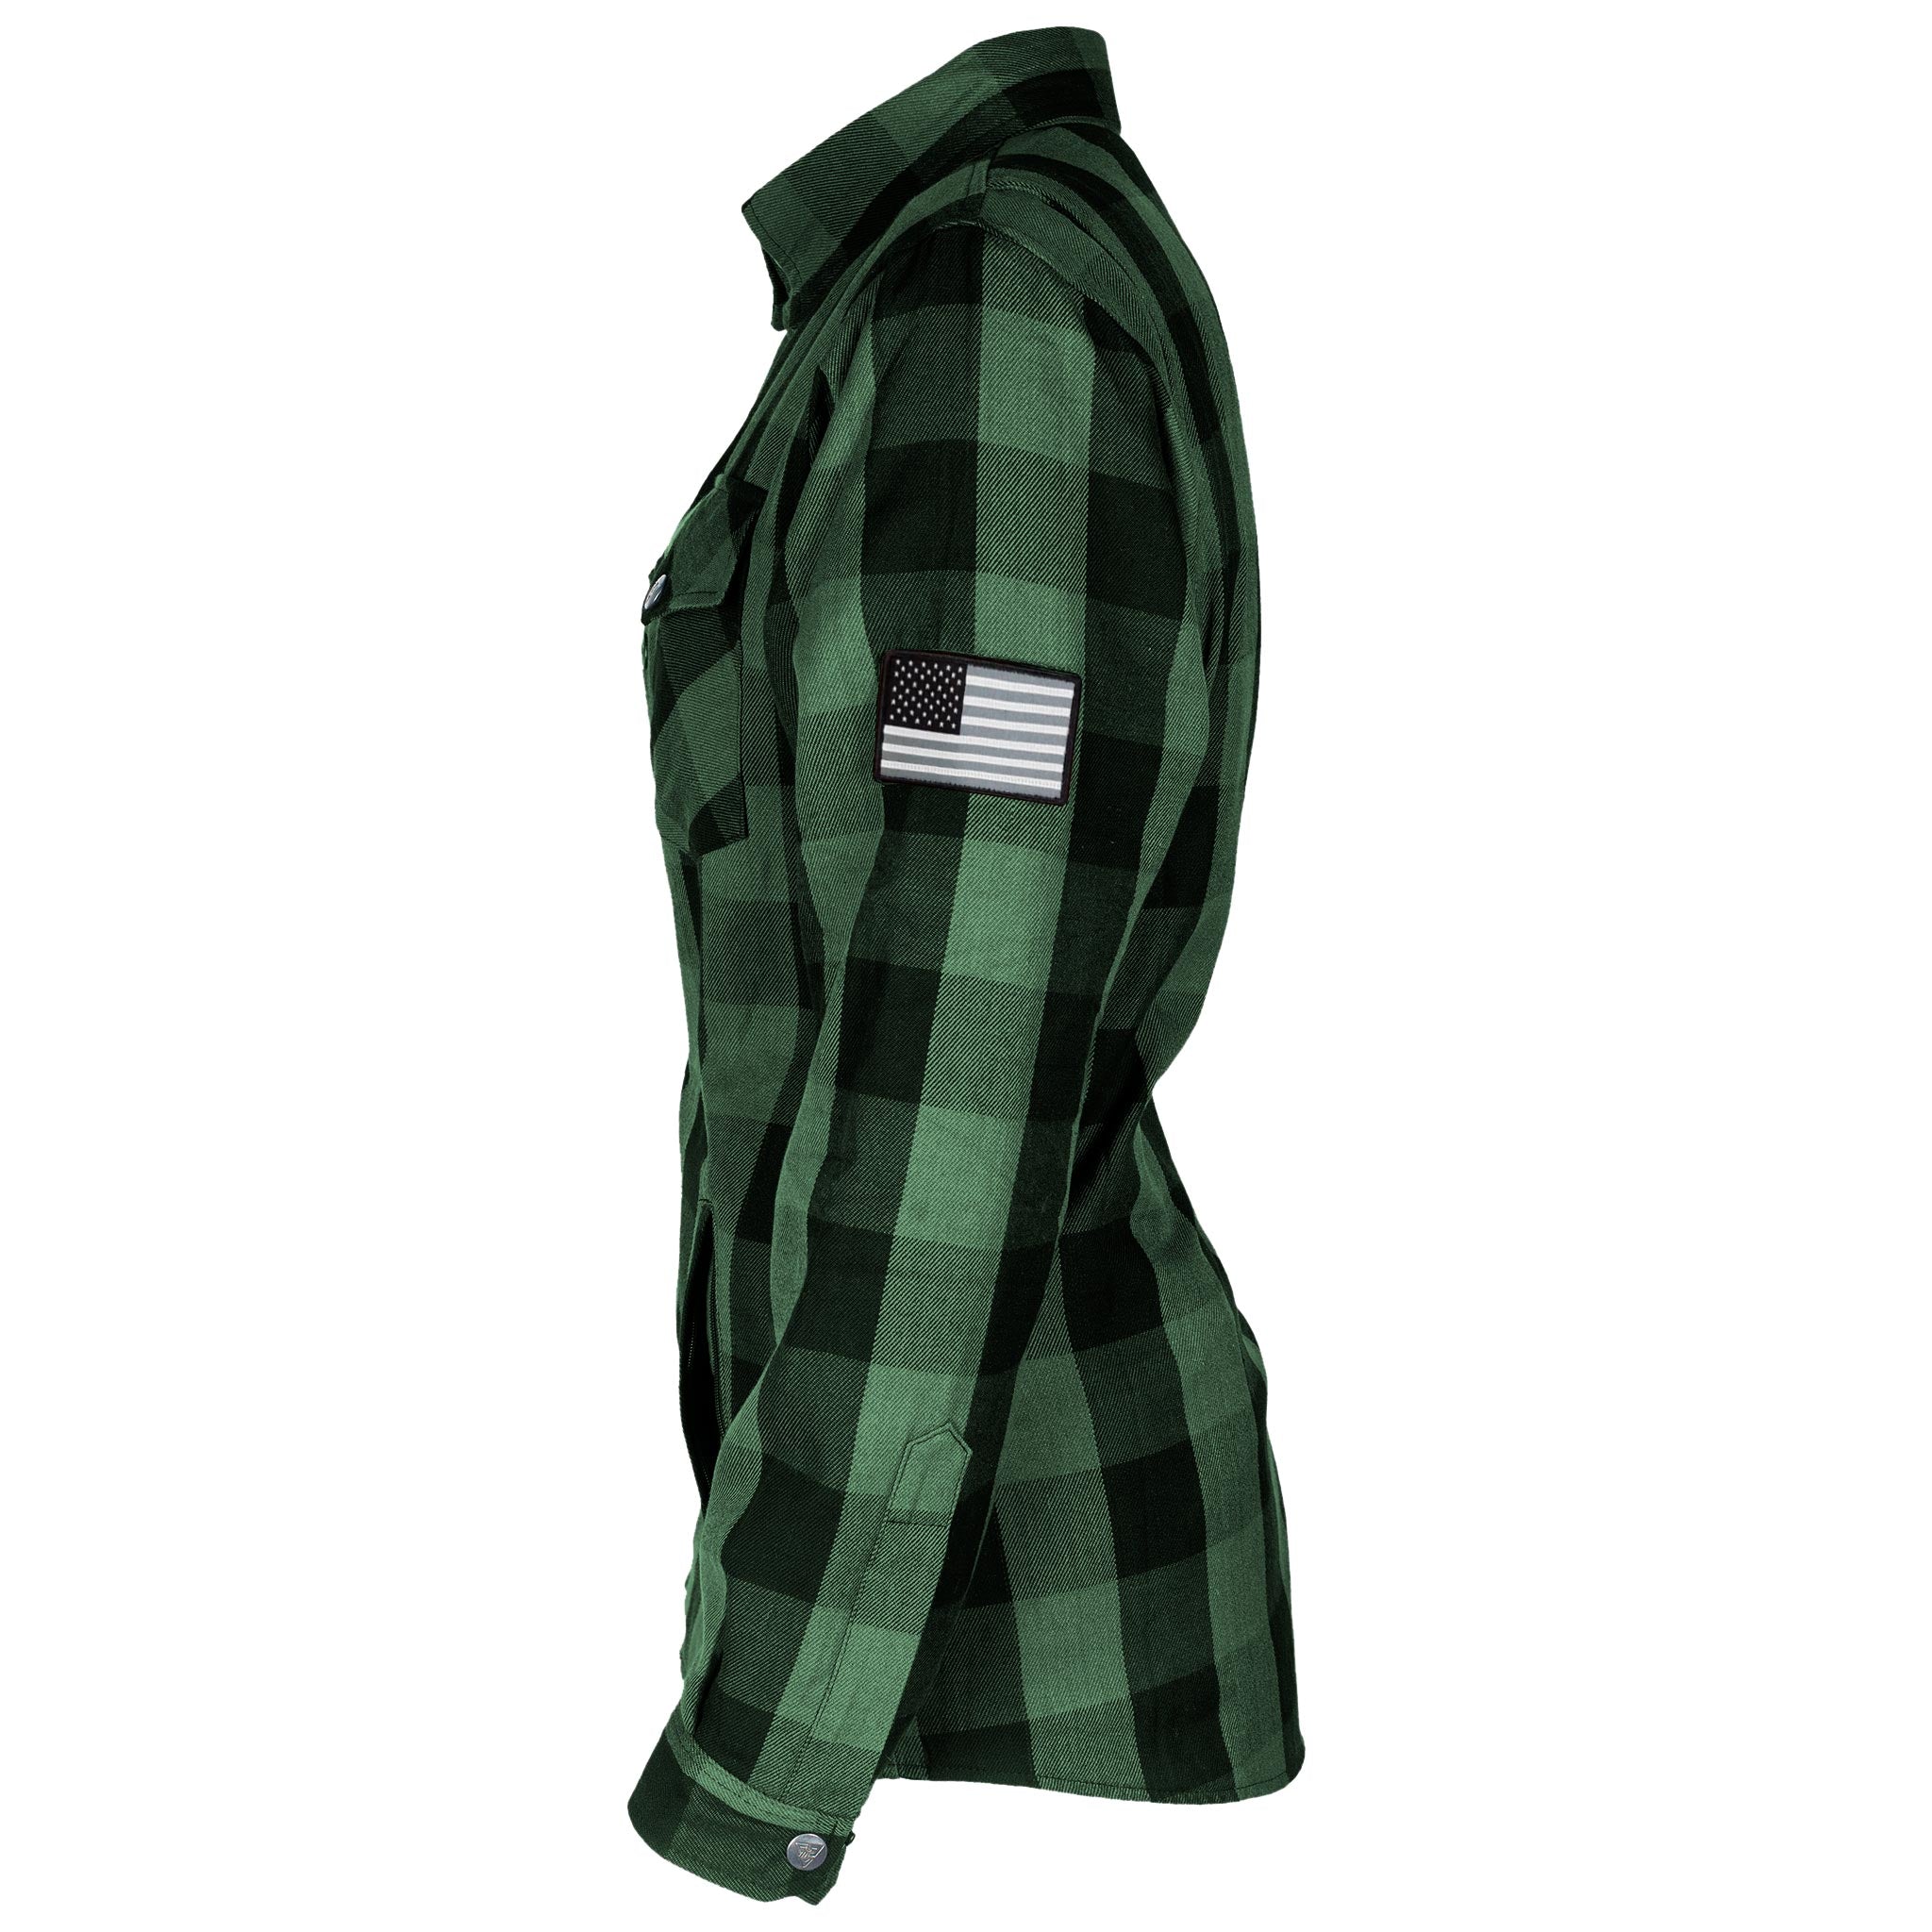 Protective Flannel Shirt for Women "Forest Fury" - Green and Black Checkered with Pads